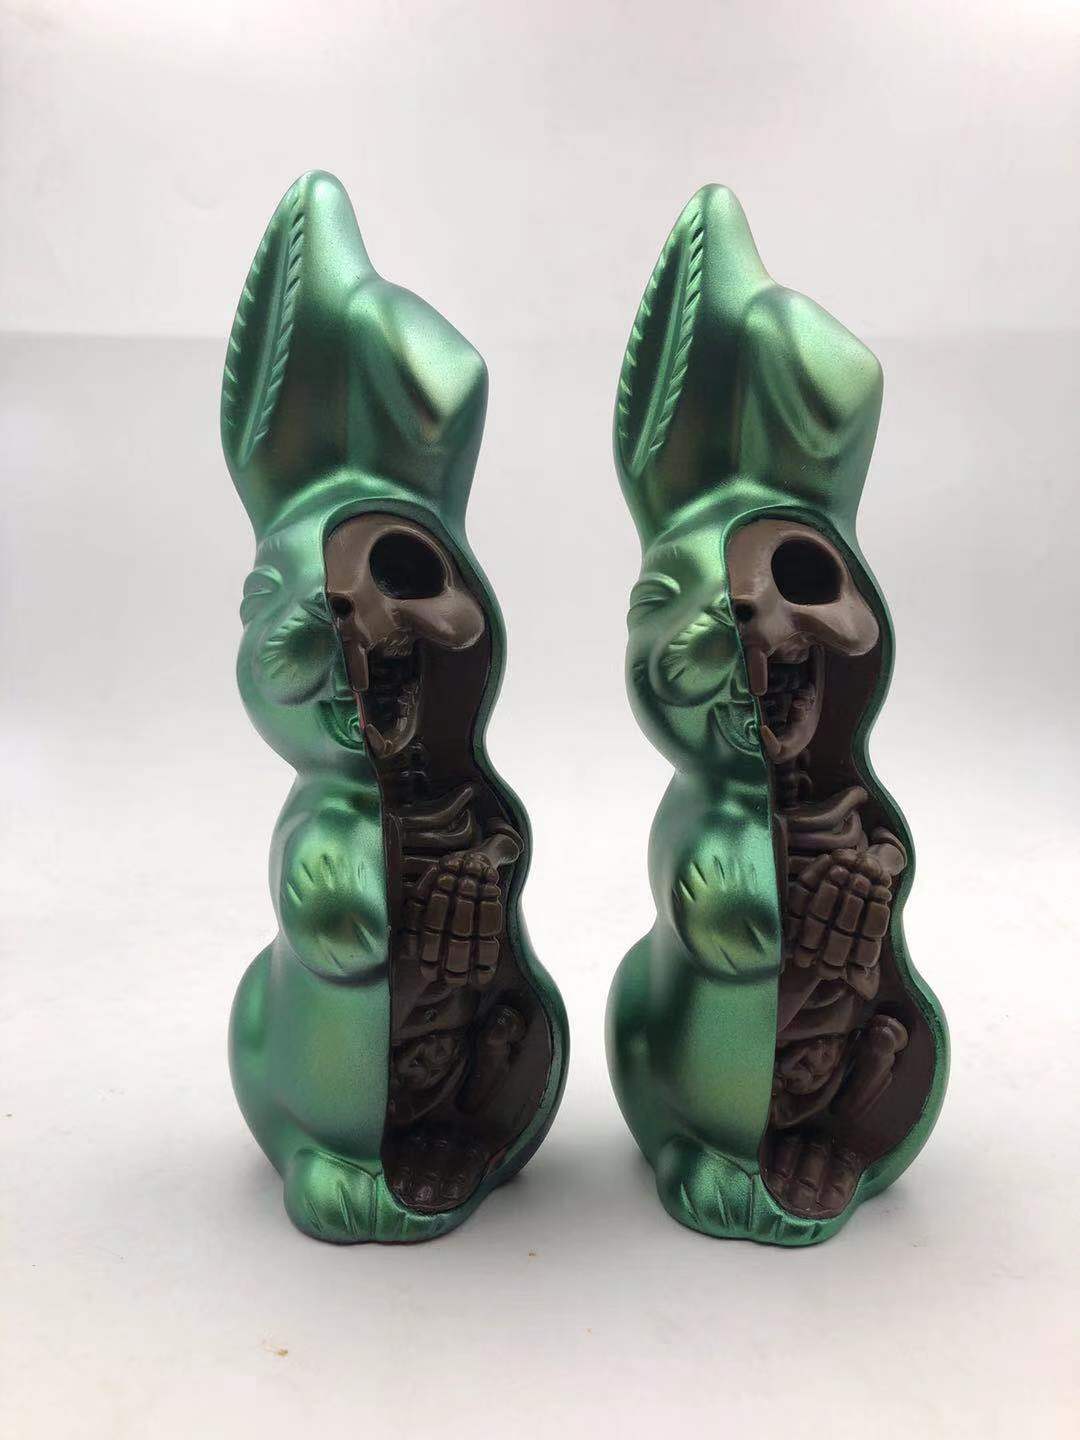 Anatomical Chocolate Easter Bunny (Pearl Mint Edition) by Jason 